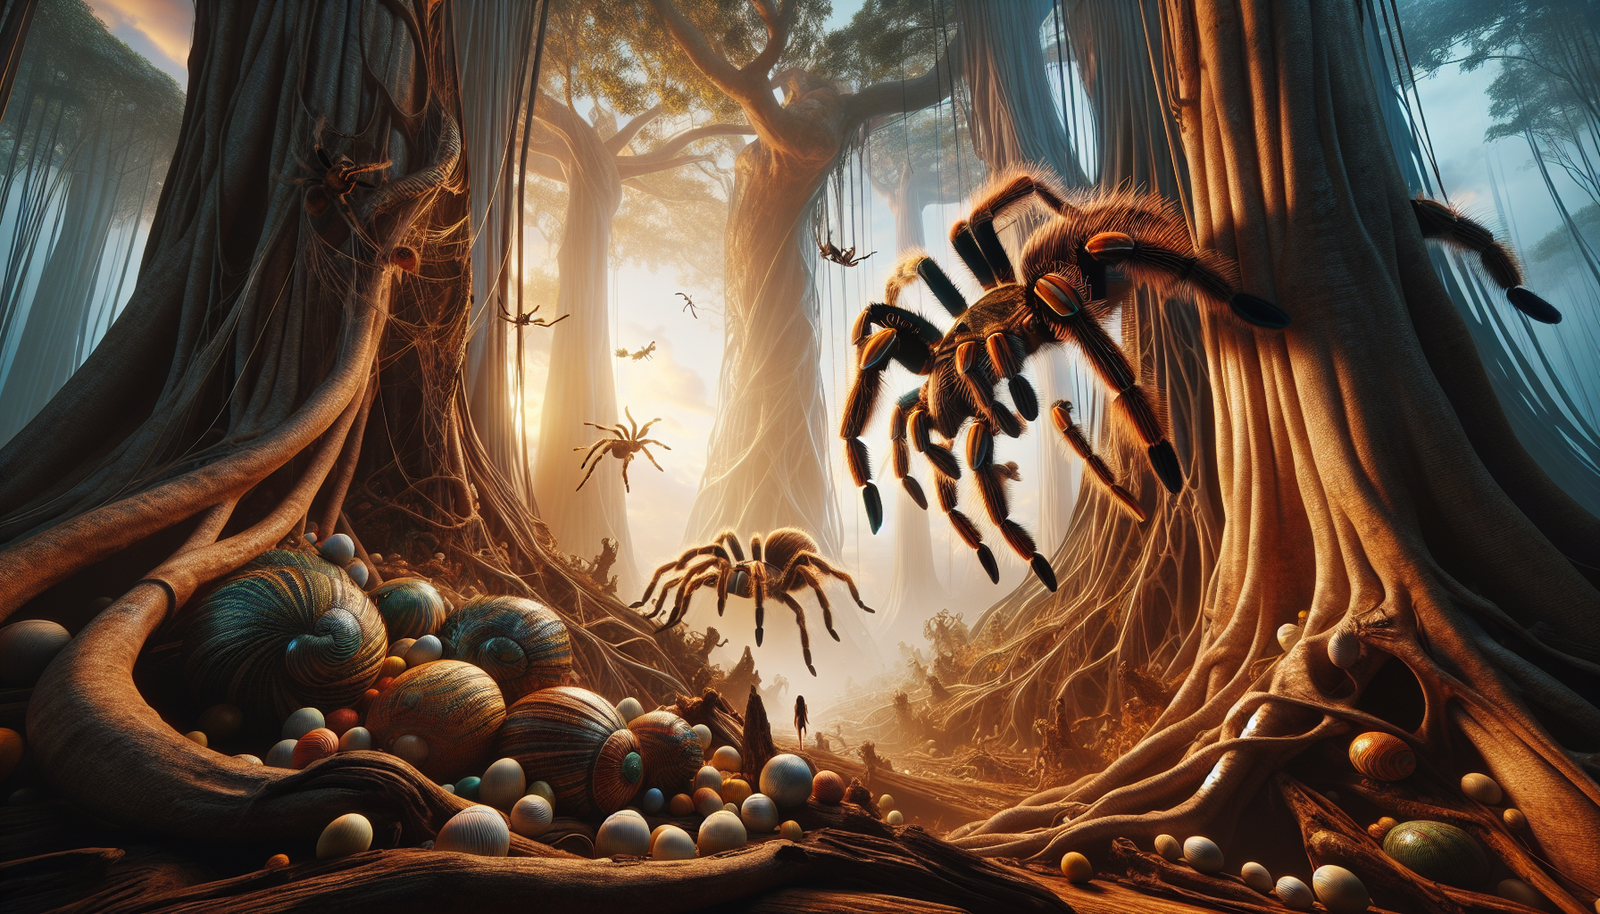 What Are The Differences In Breeding Between Arboreal And Terrestrial Tarantulas?